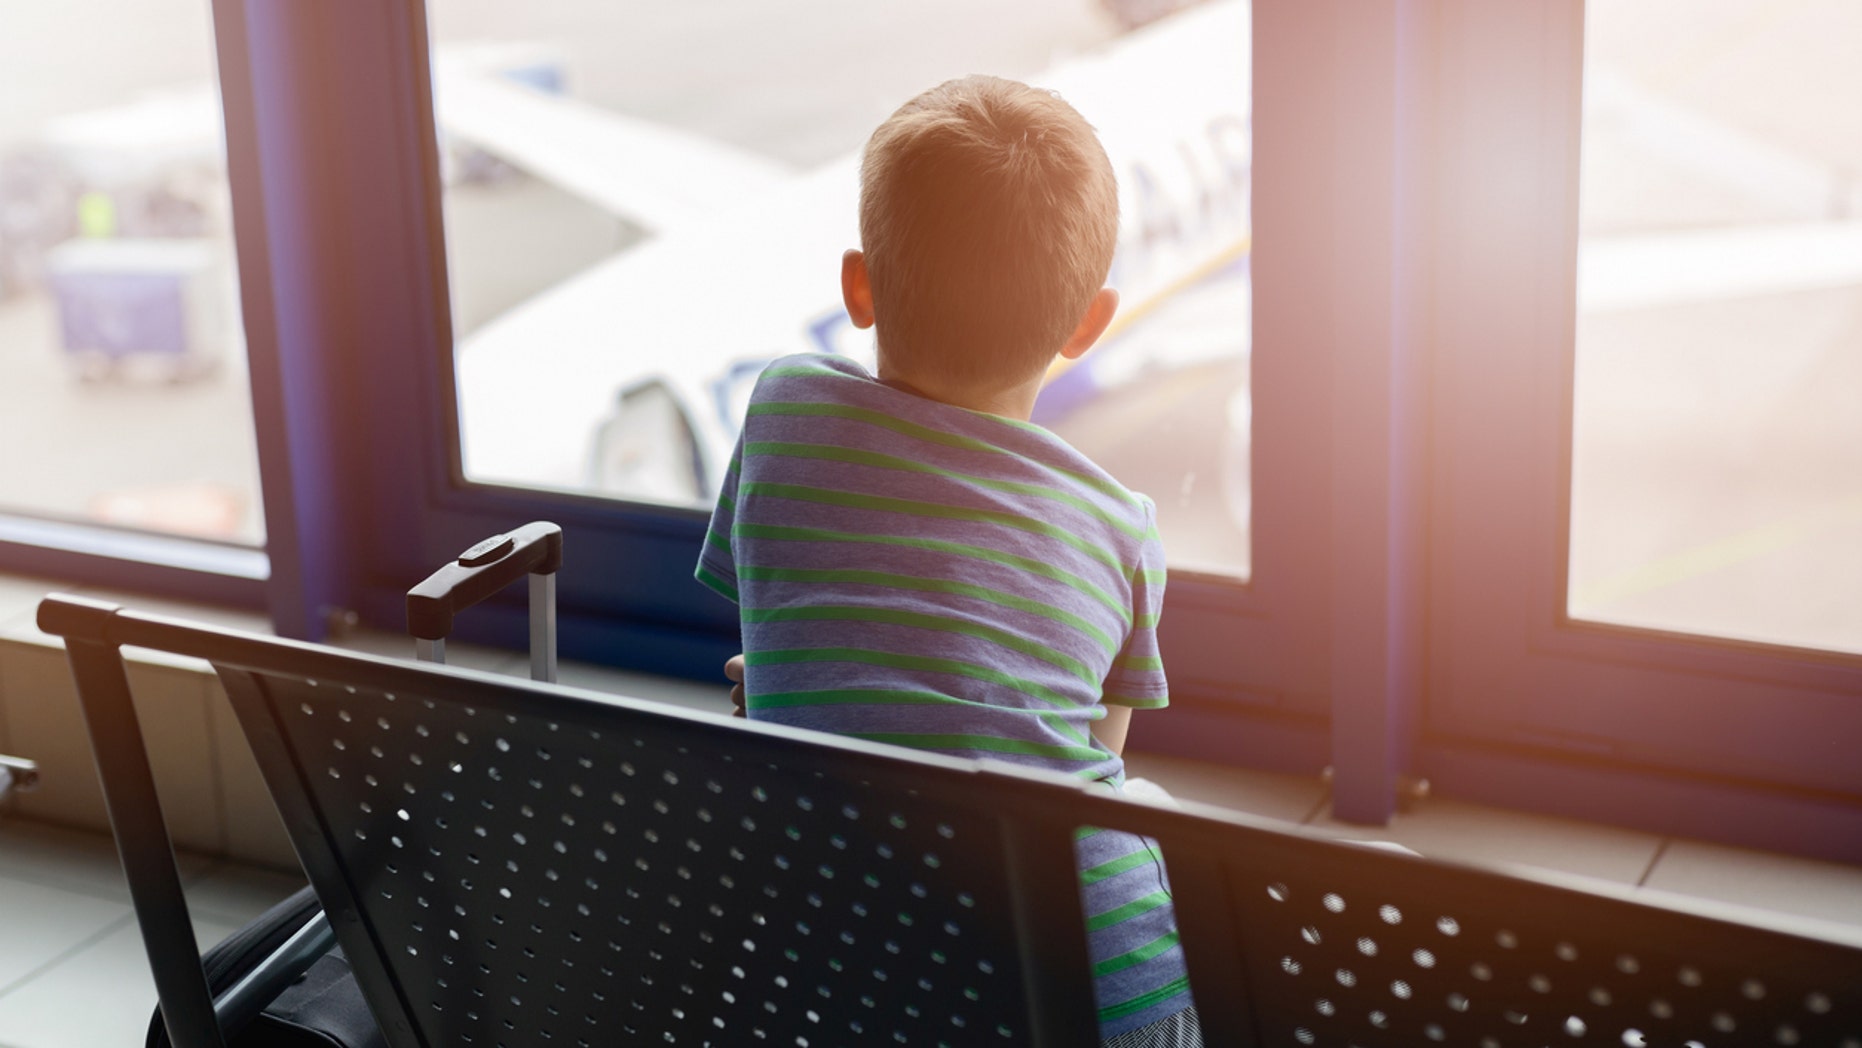 An 11-year-old boy nearly boarded a plane without a ticket or supervision.